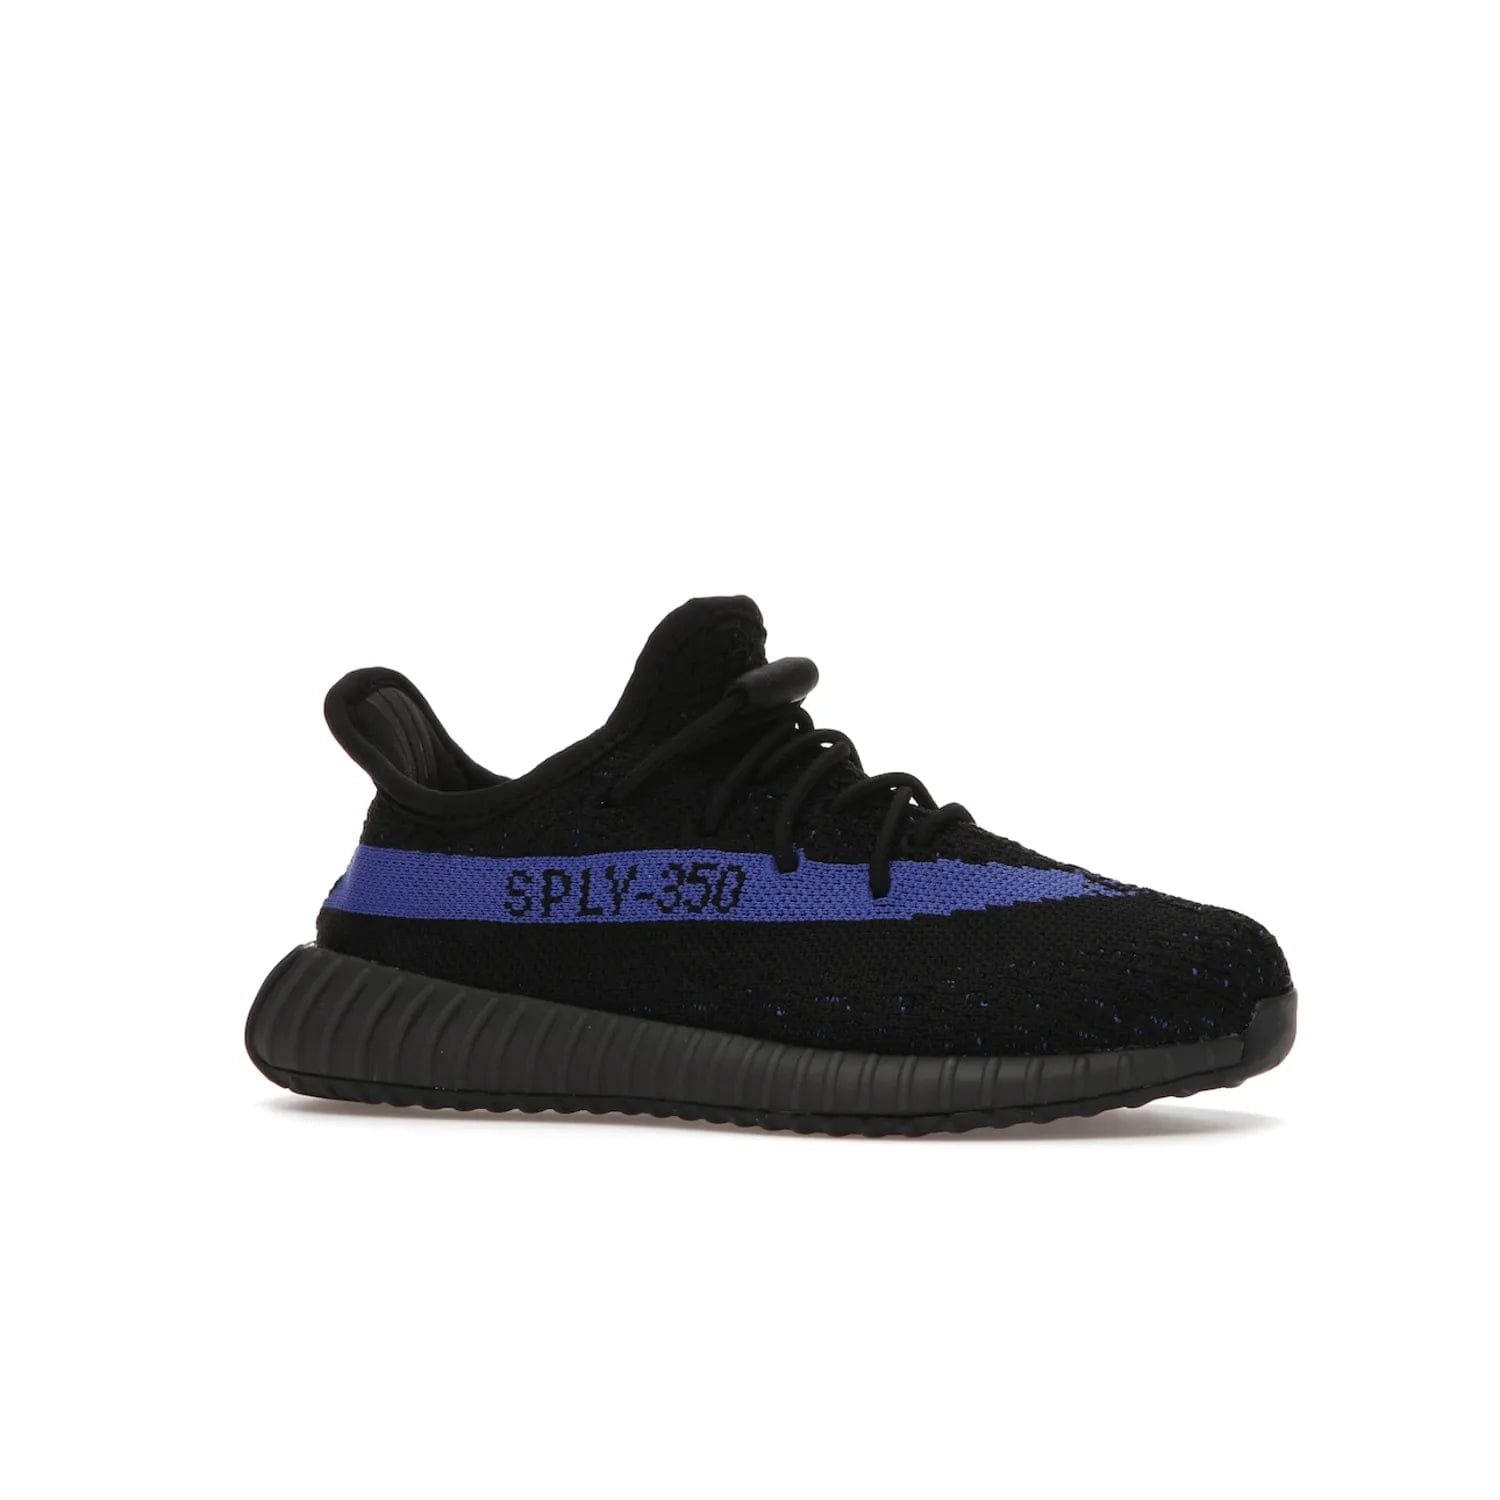 adidas Yeezy Boost 350 V2 Dazzling Blue (Kids) - Image 3 - Only at www.BallersClubKickz.com - Shop the adidas Yeezy Boost 350 V2 Dazzling Blue (Kids). Features a black Primeknit upper with a royal blue 'SPLY-350' streak and a full-length Boost midsole. Durable rubber outsole provides plenty of traction. Available for $160.